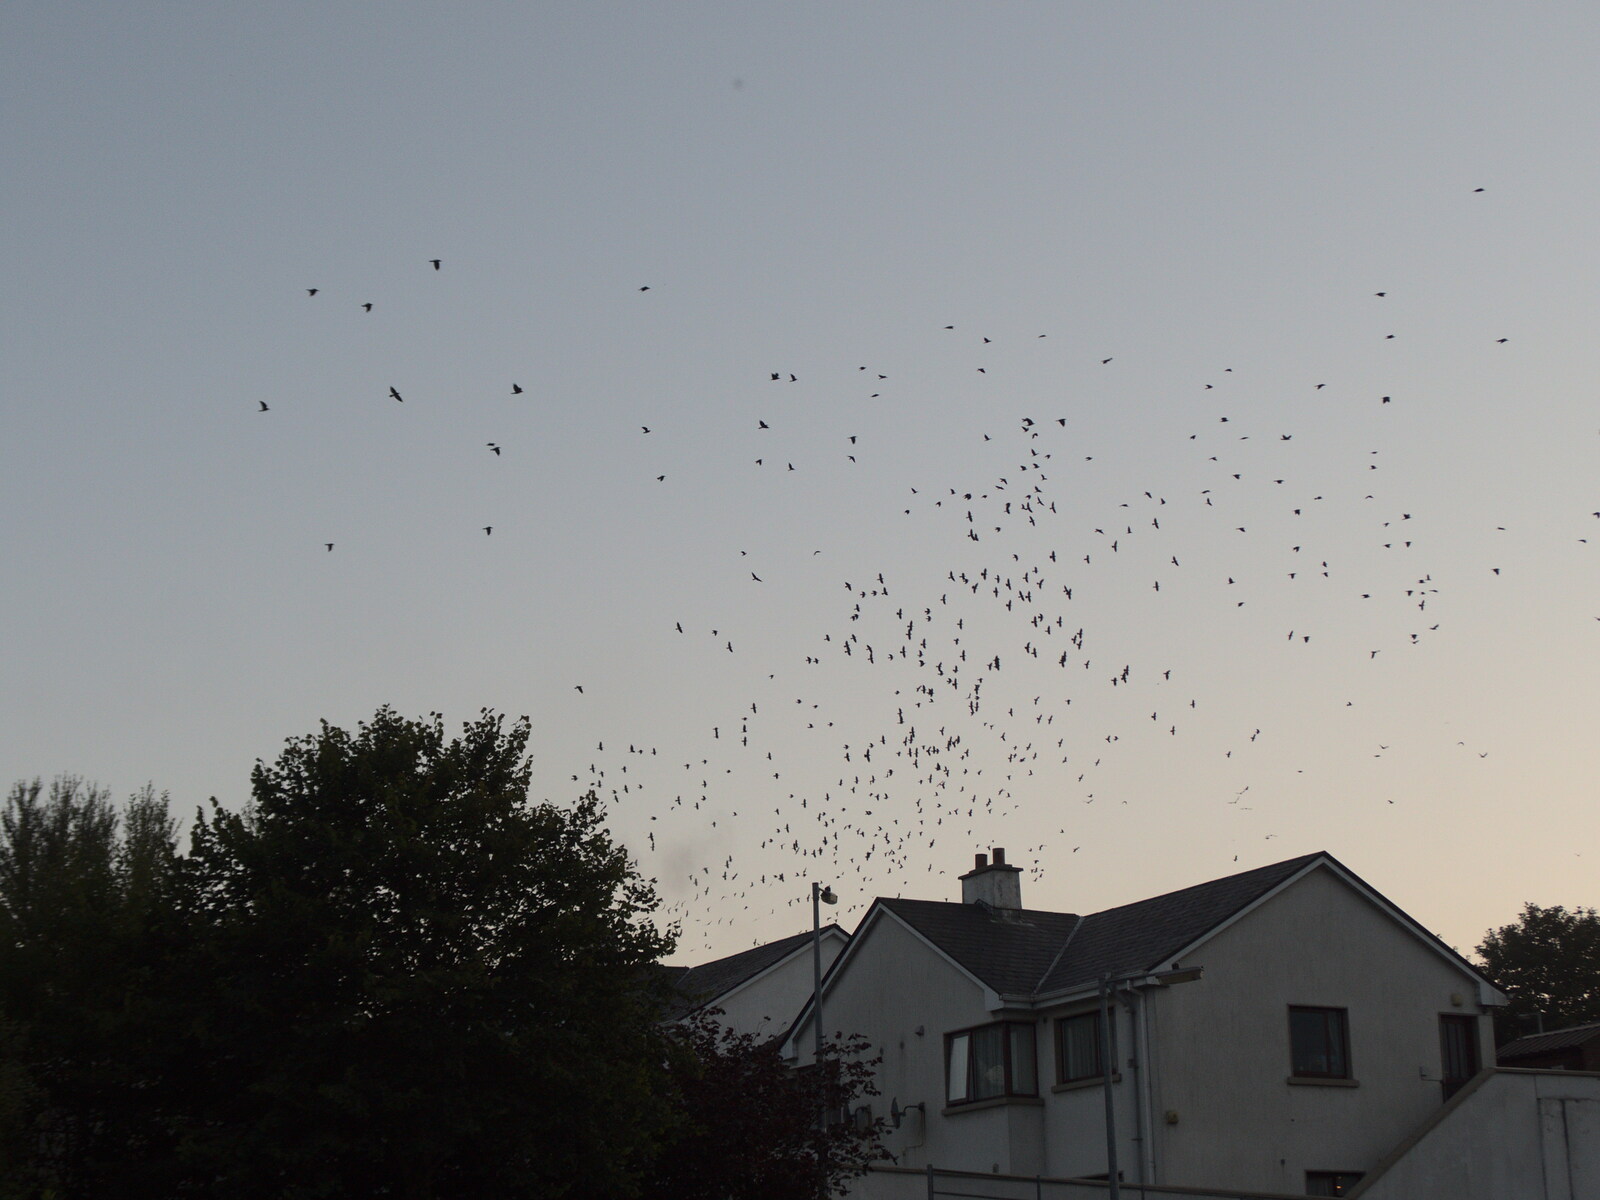 A Trip to Manorhamilton, County Leitrim, Ireland - 11th August 2021: A load of birds take to the wing